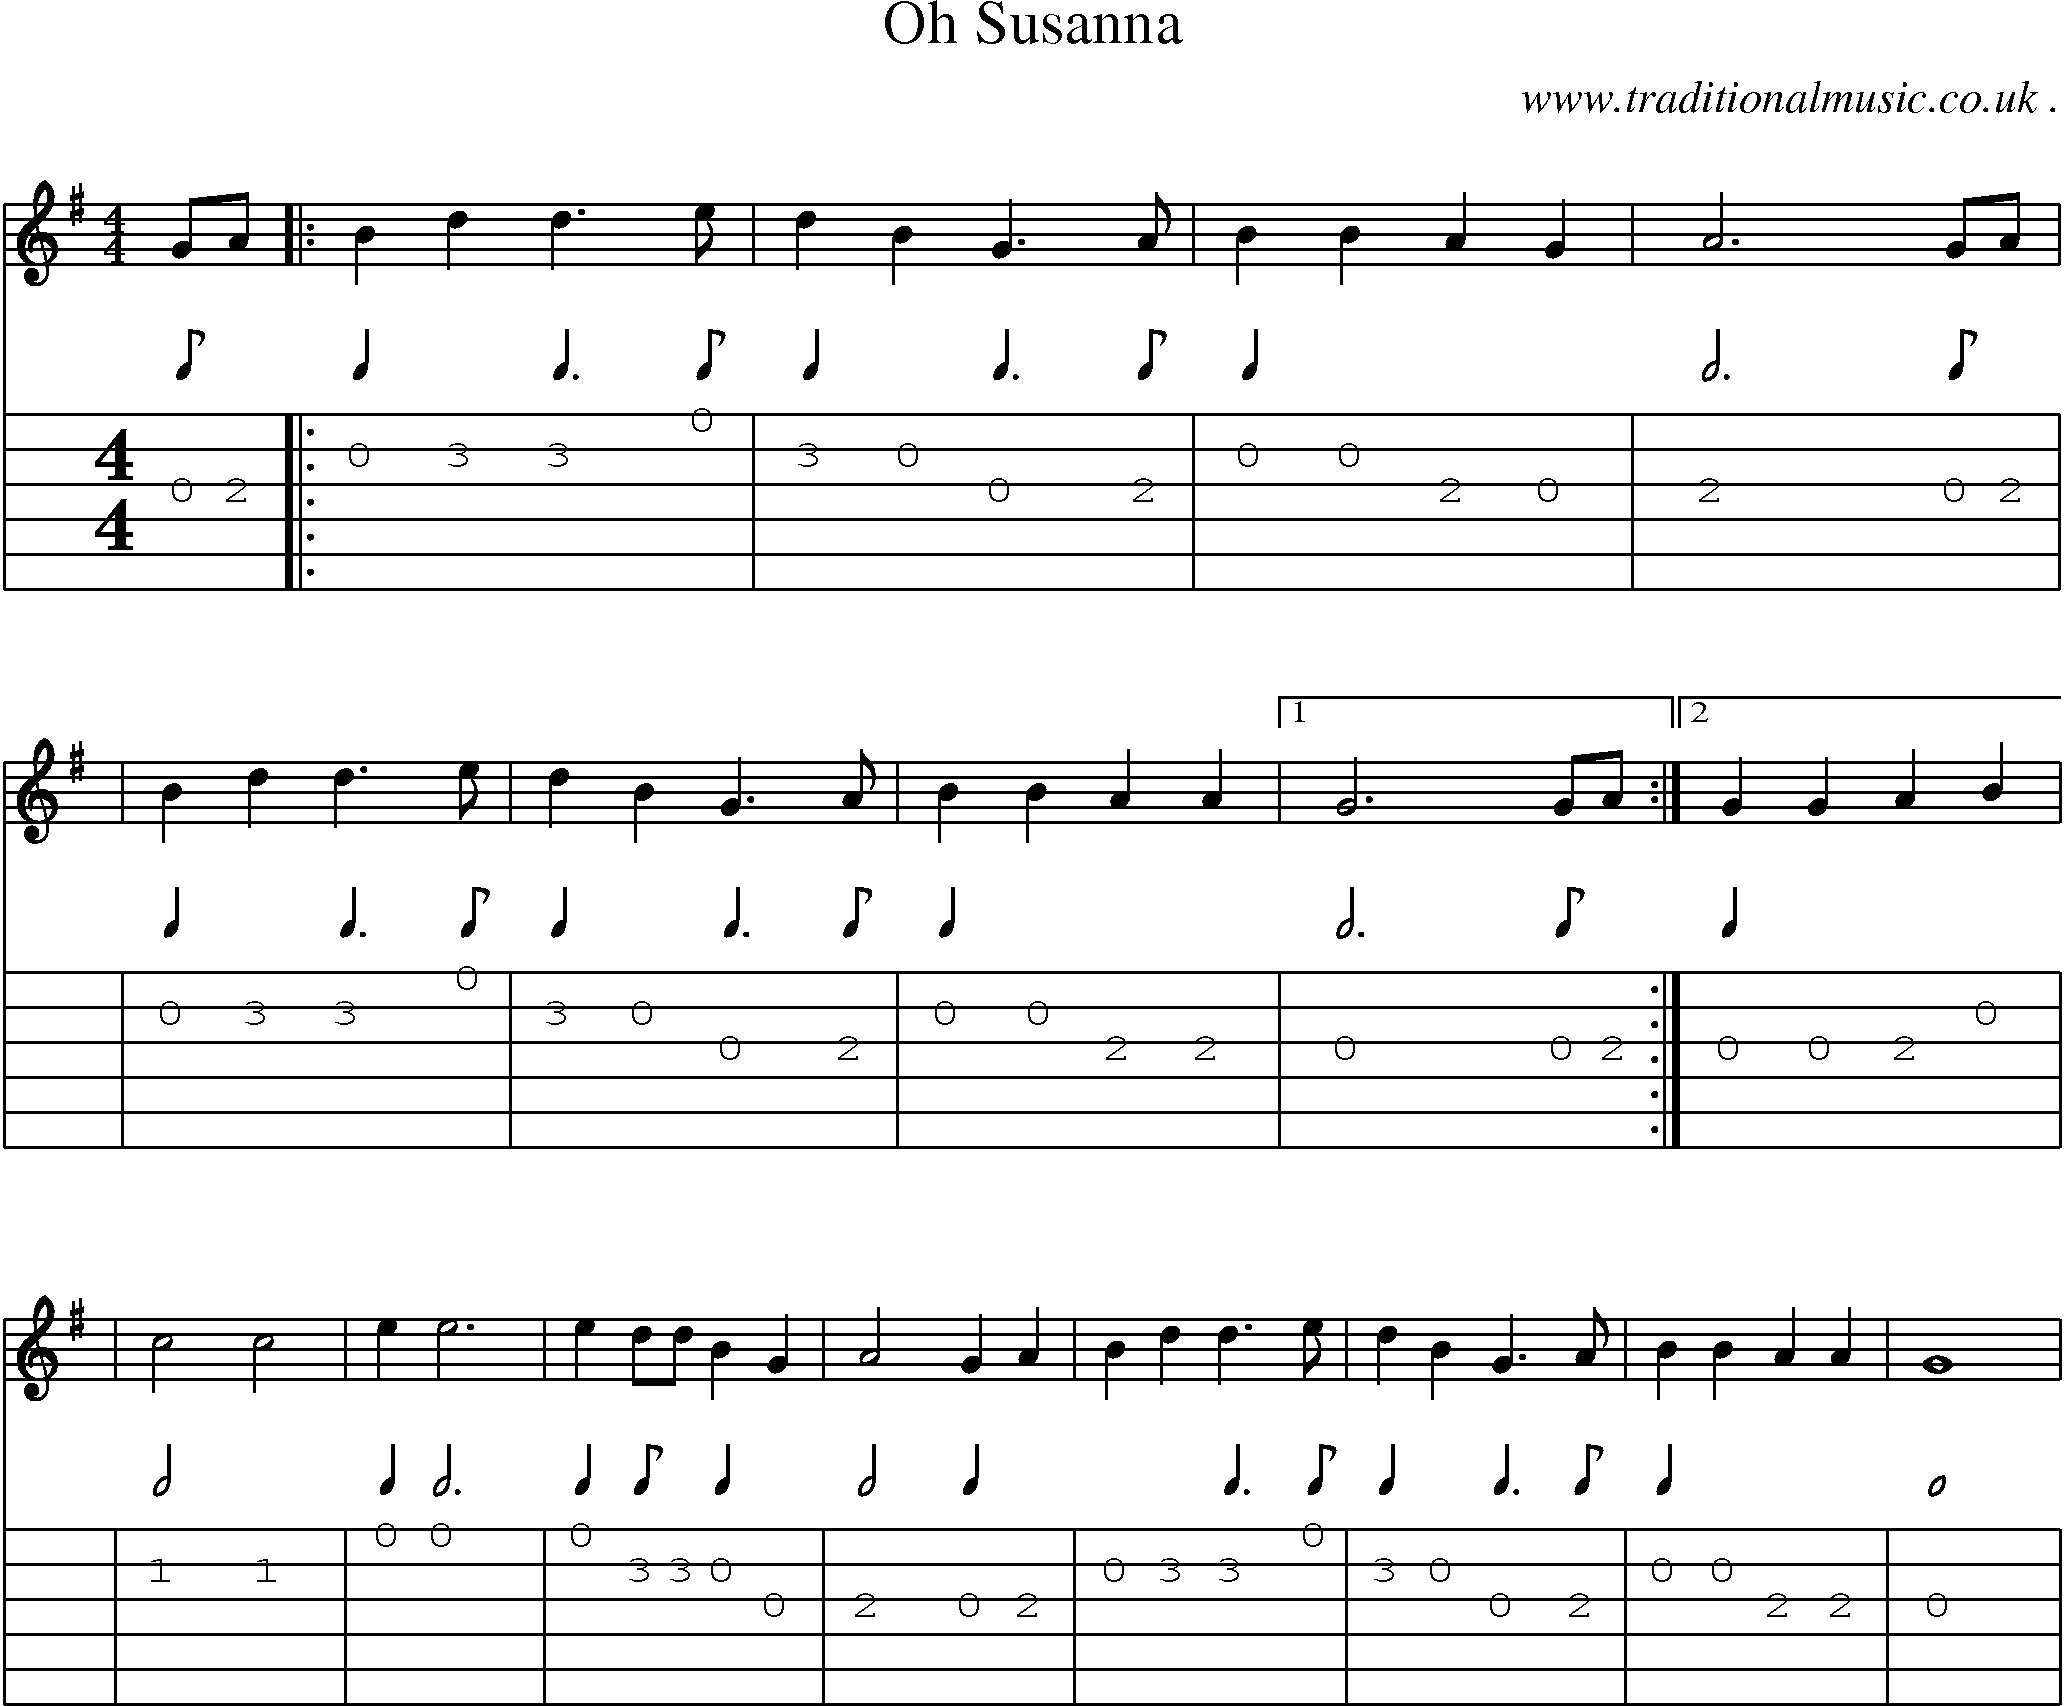 Sheet-Music and Guitar Tabs for Oh Susanna